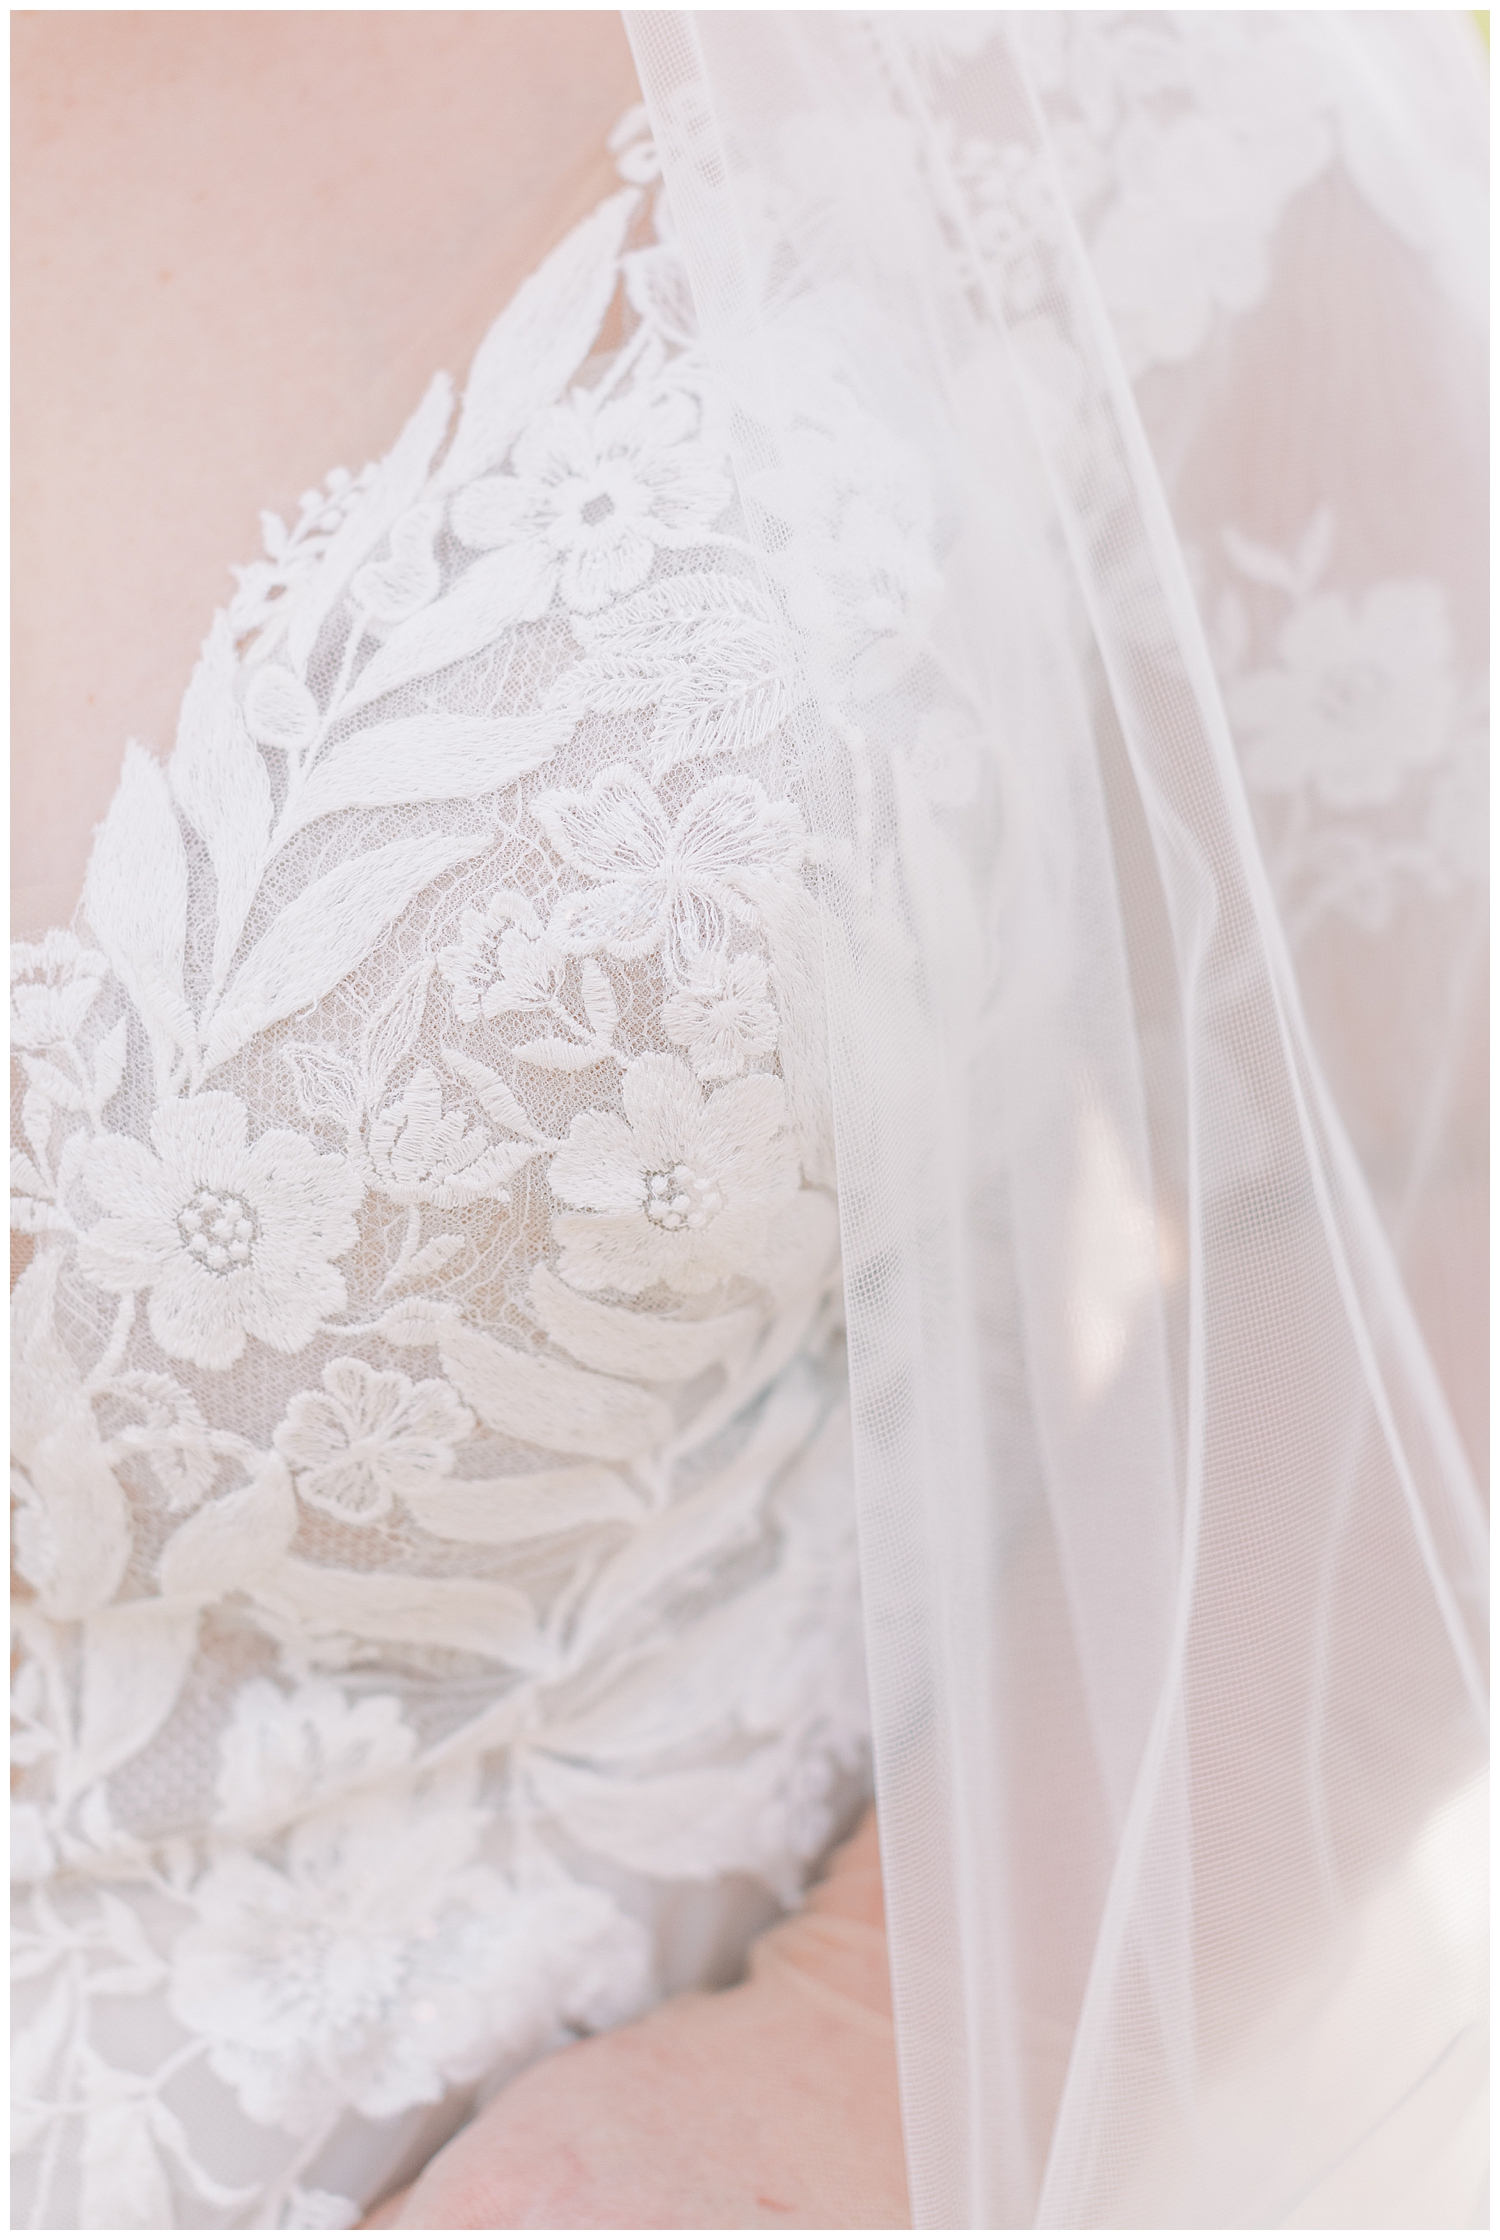 Lace detail covers the bridal gown.